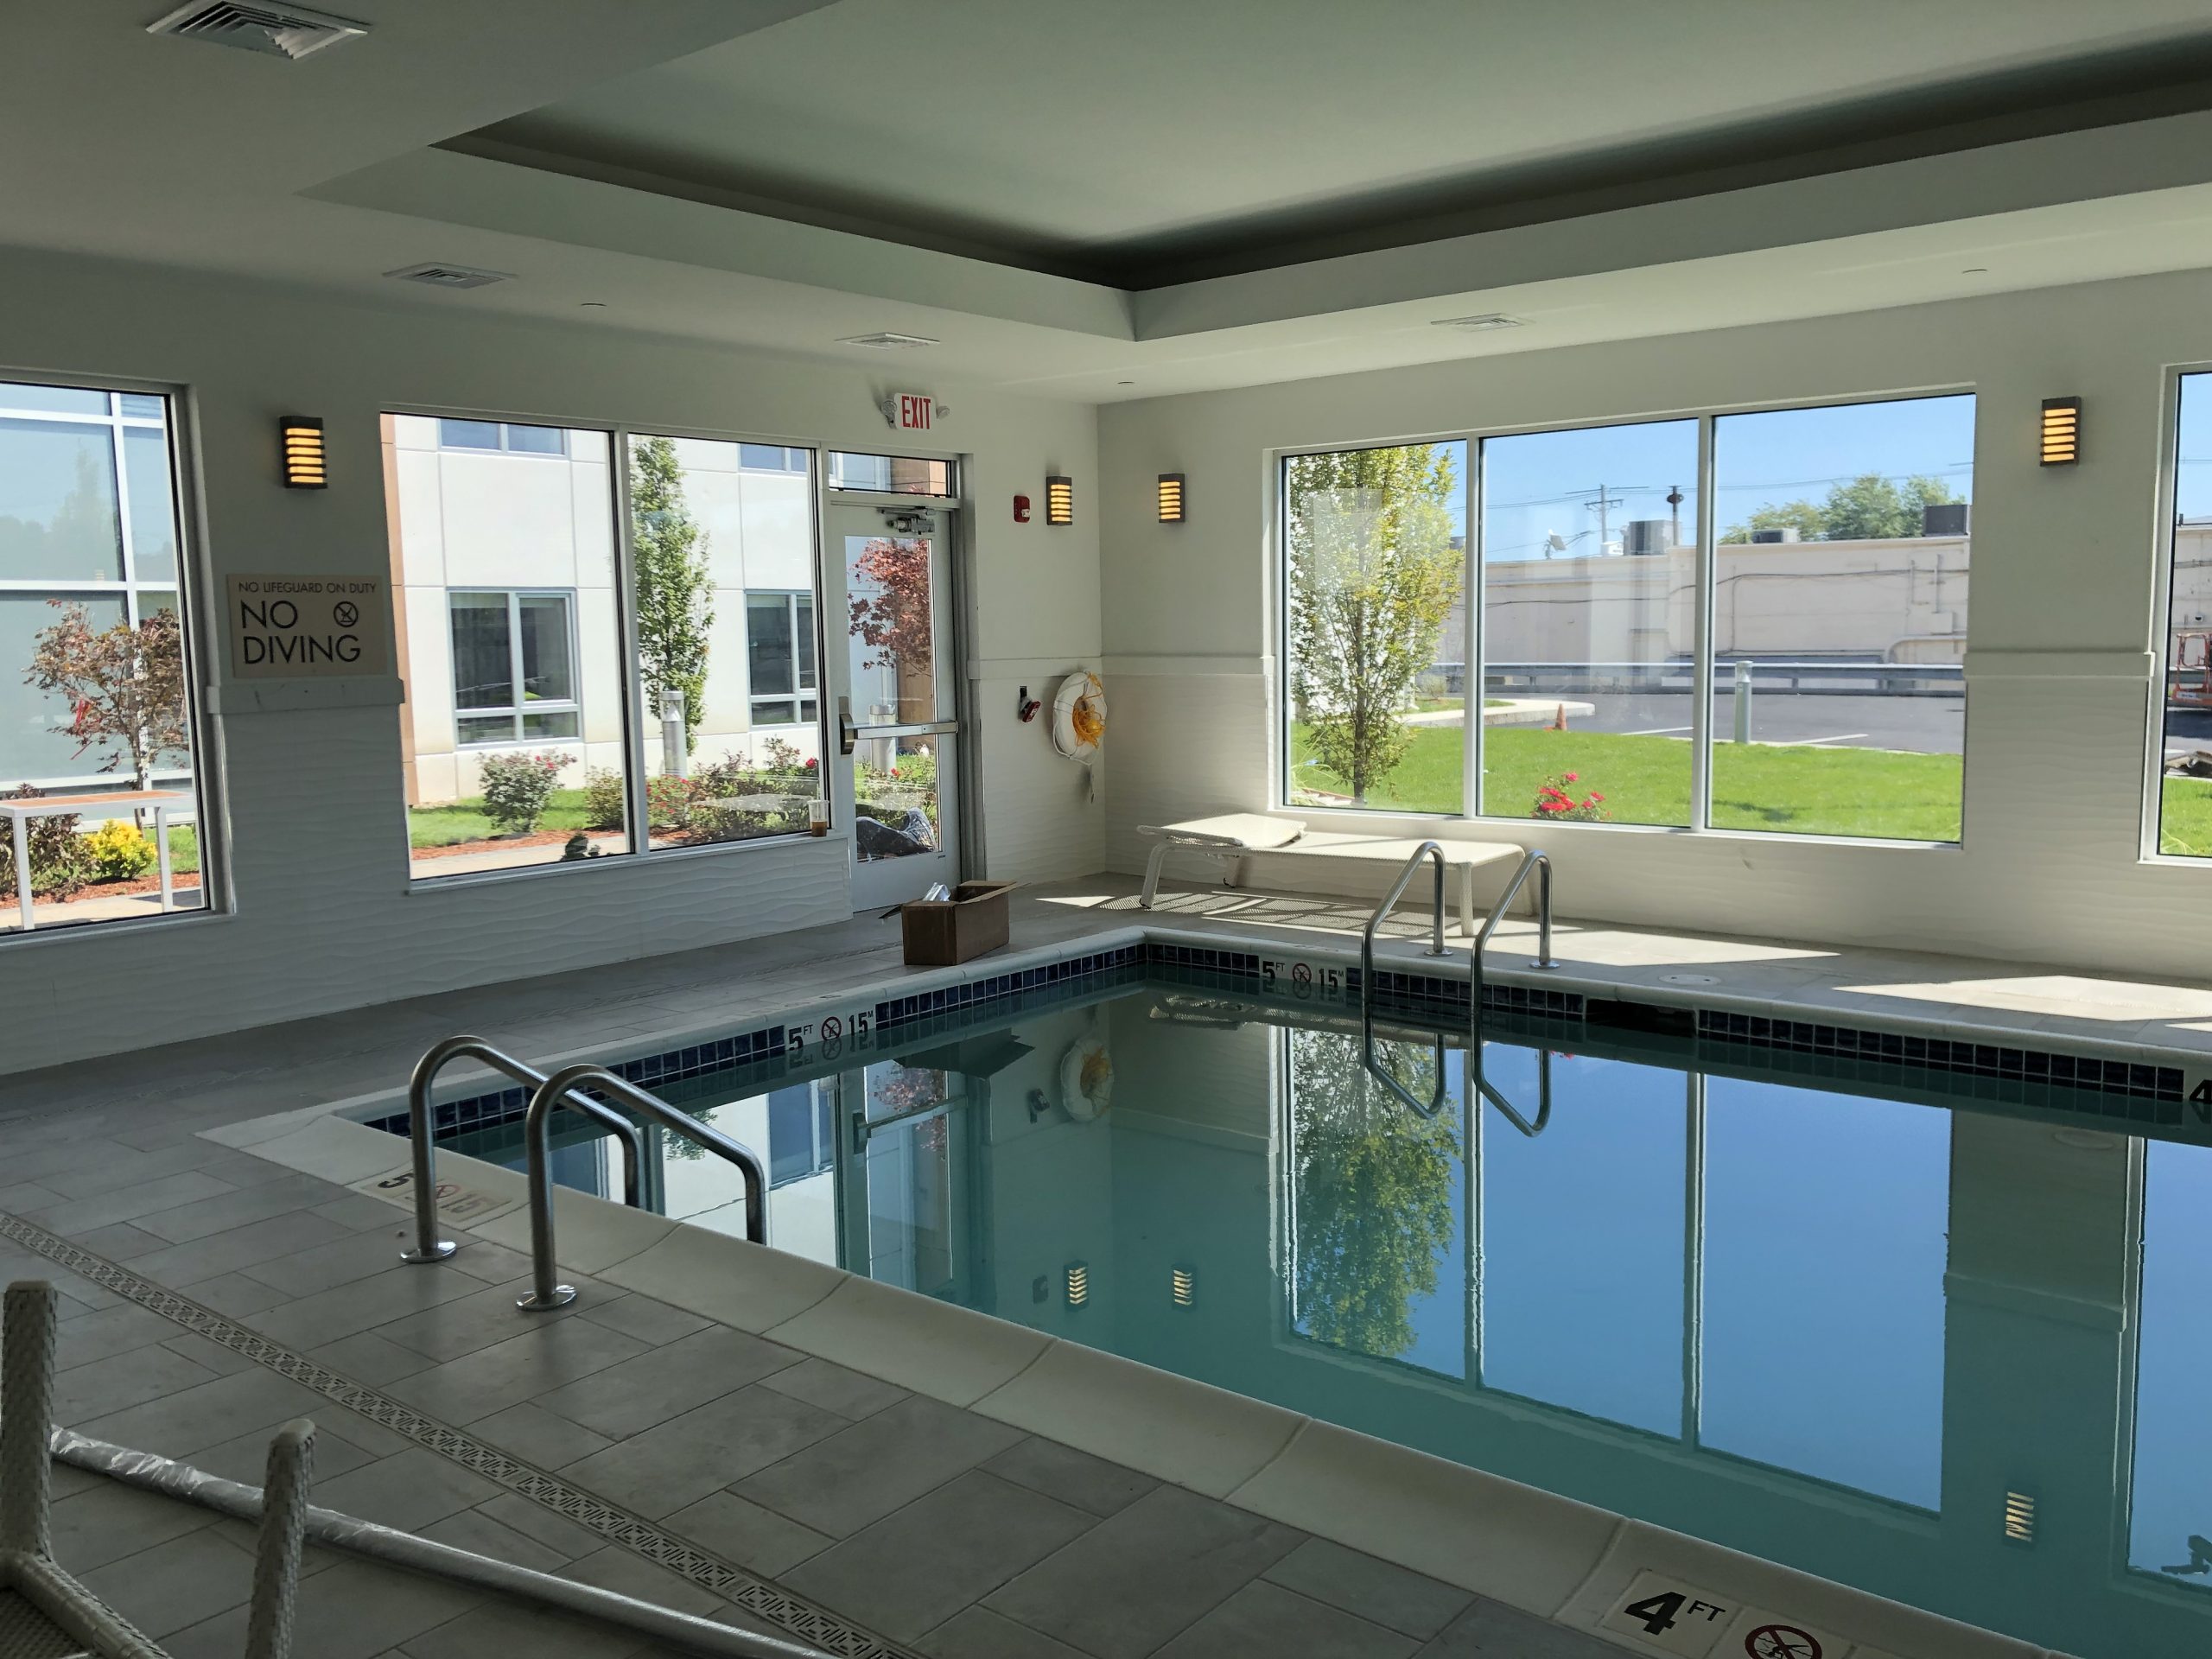 Element Hotel, Chelmsford, MA_Swimming Pool Design_by Russell and Dawson